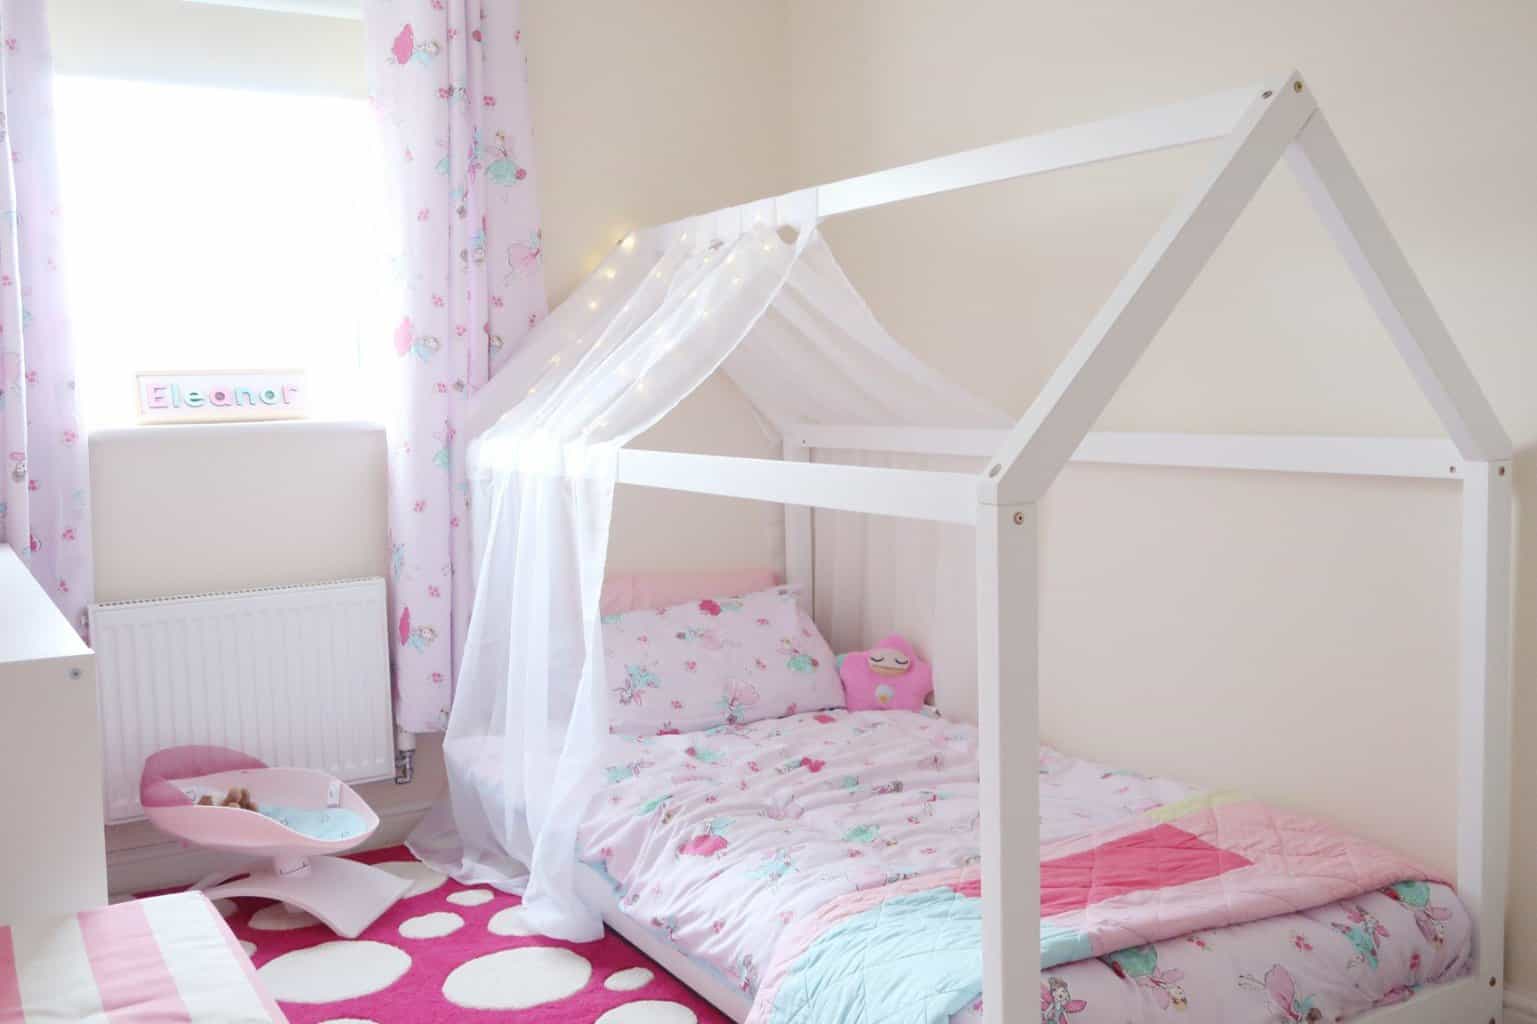 cot house bed